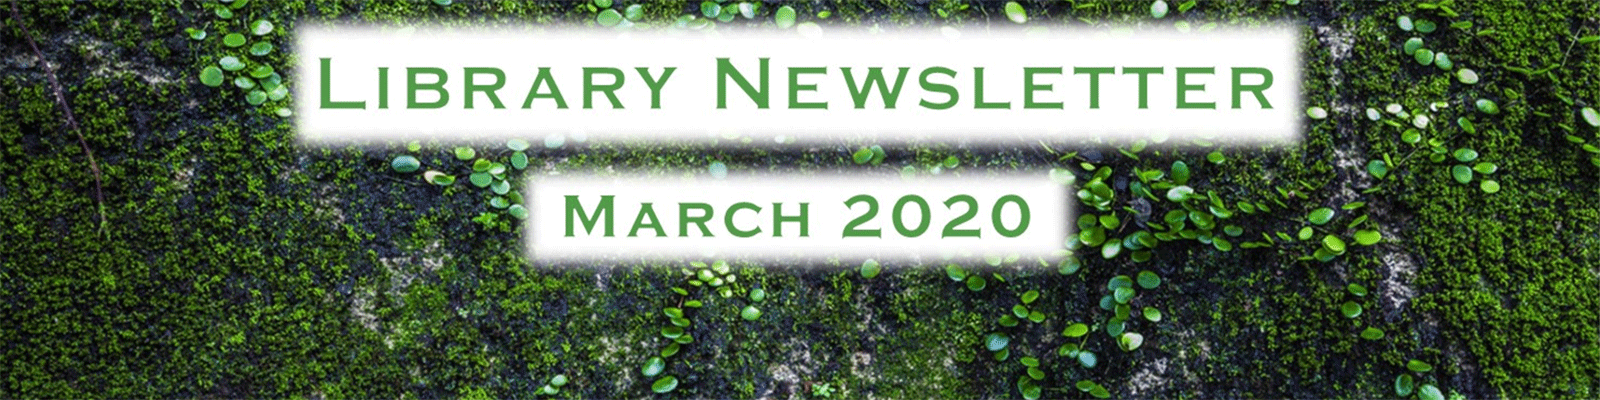 March 2020 Library Newsletter moss banner